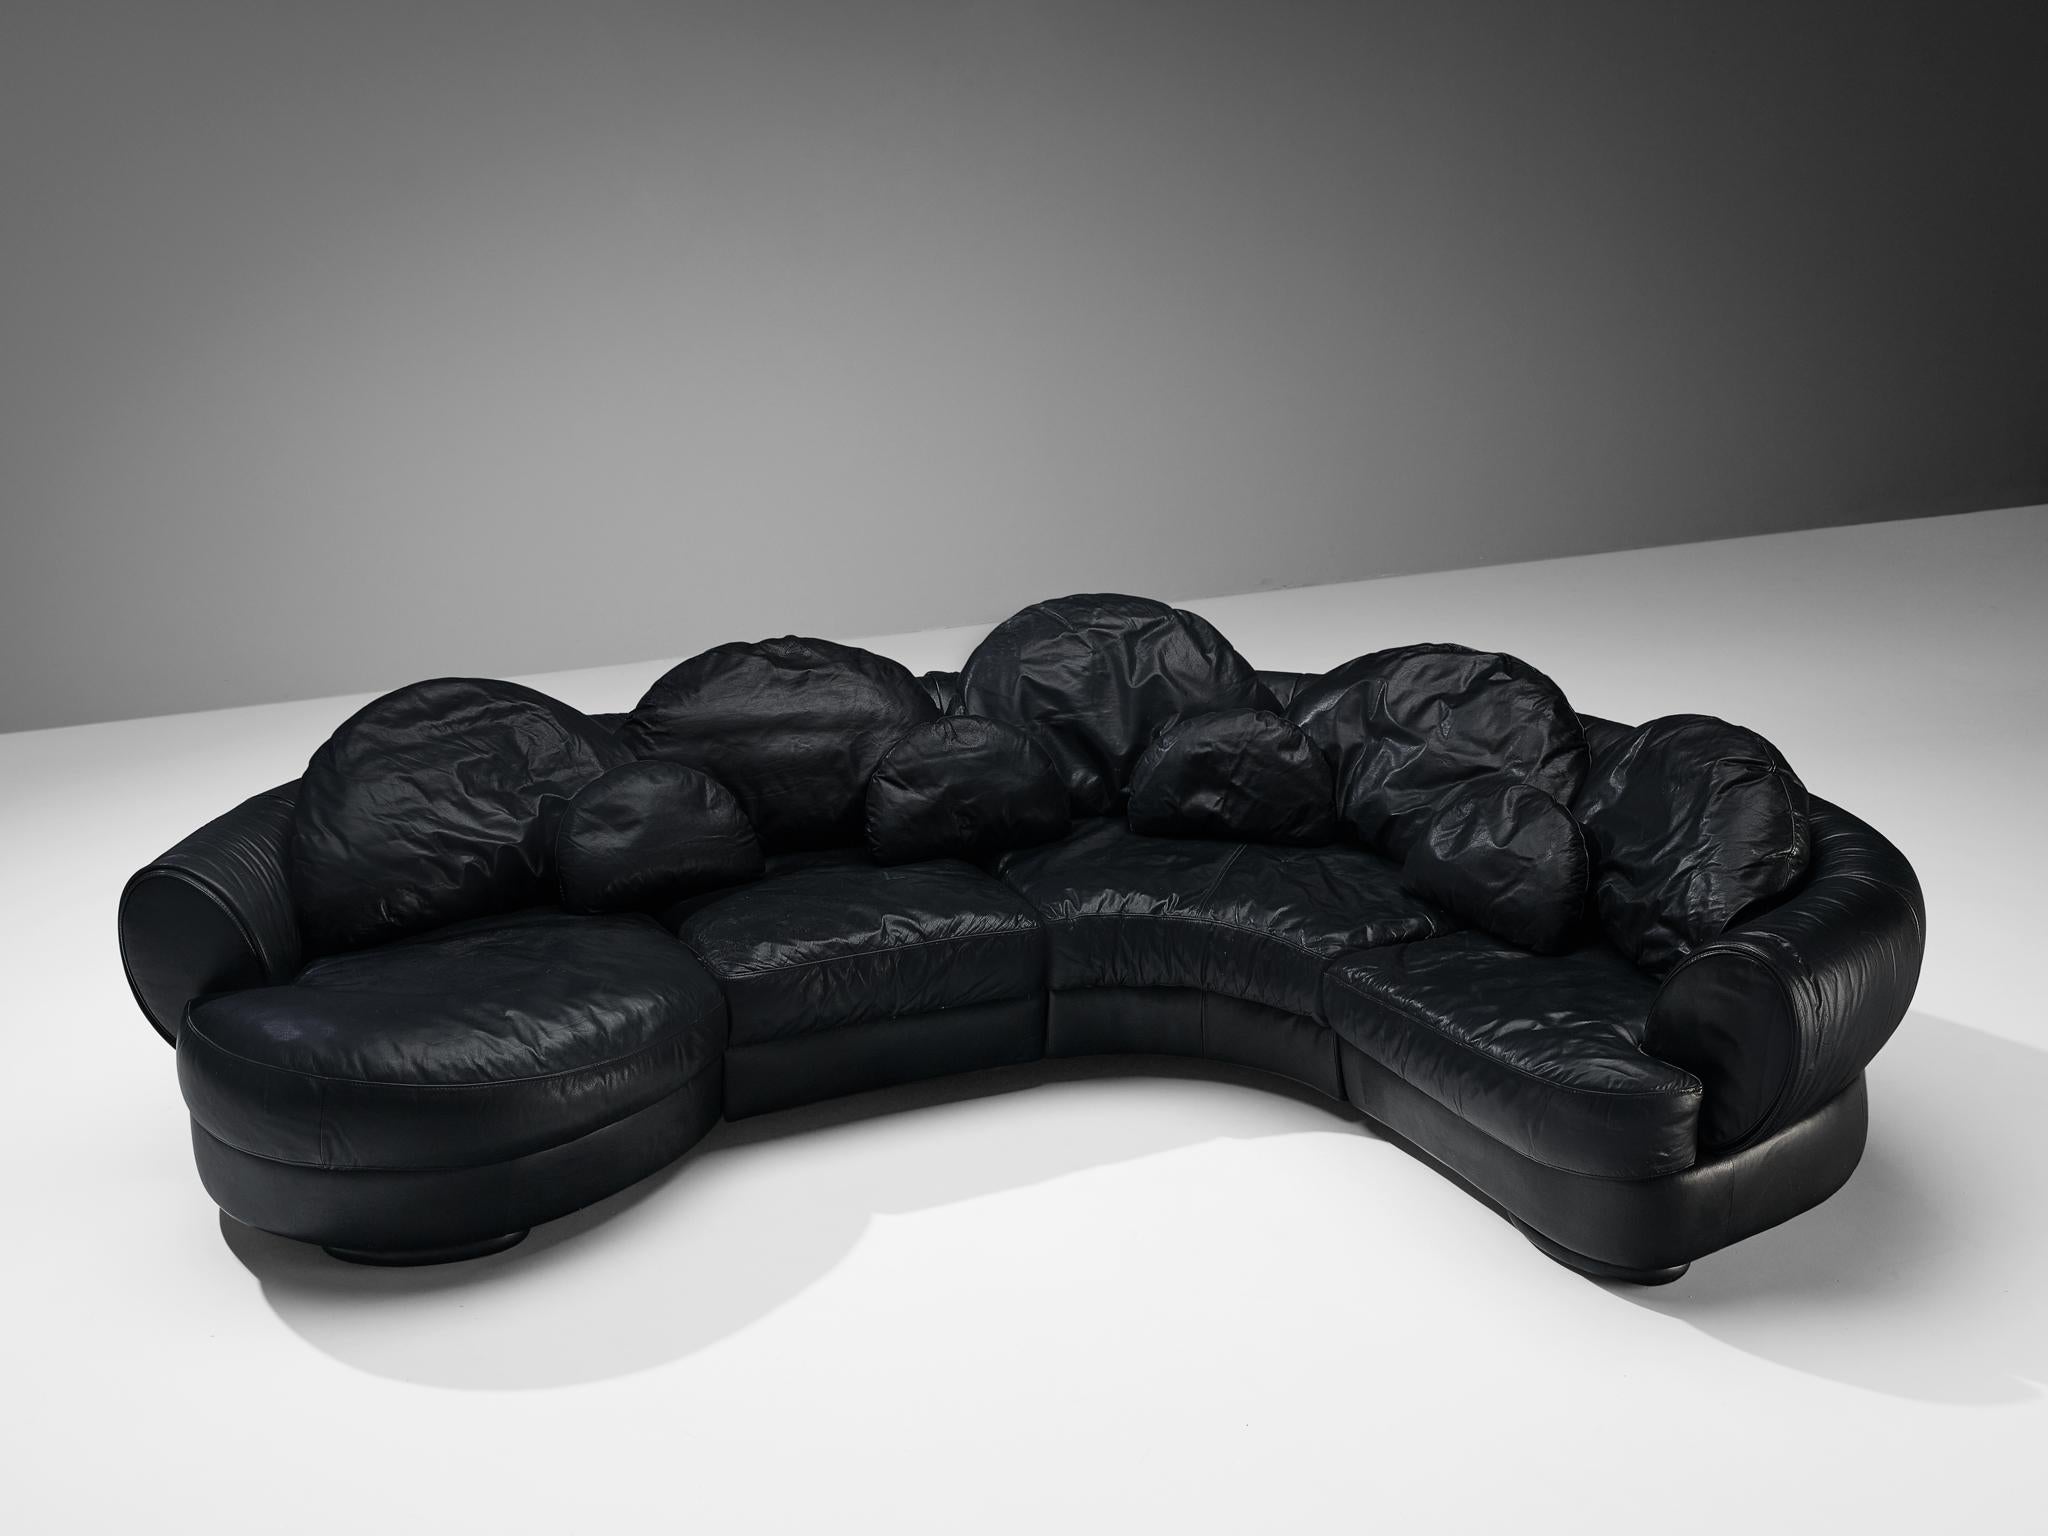 Attributed to Wiener Werkstätte, modular sofa, leather, Austria, 1980s

This sofa is fully executed in a black leather that contributes to a unified look. The construction consists of four elements. The sofa embraces an organic look through its